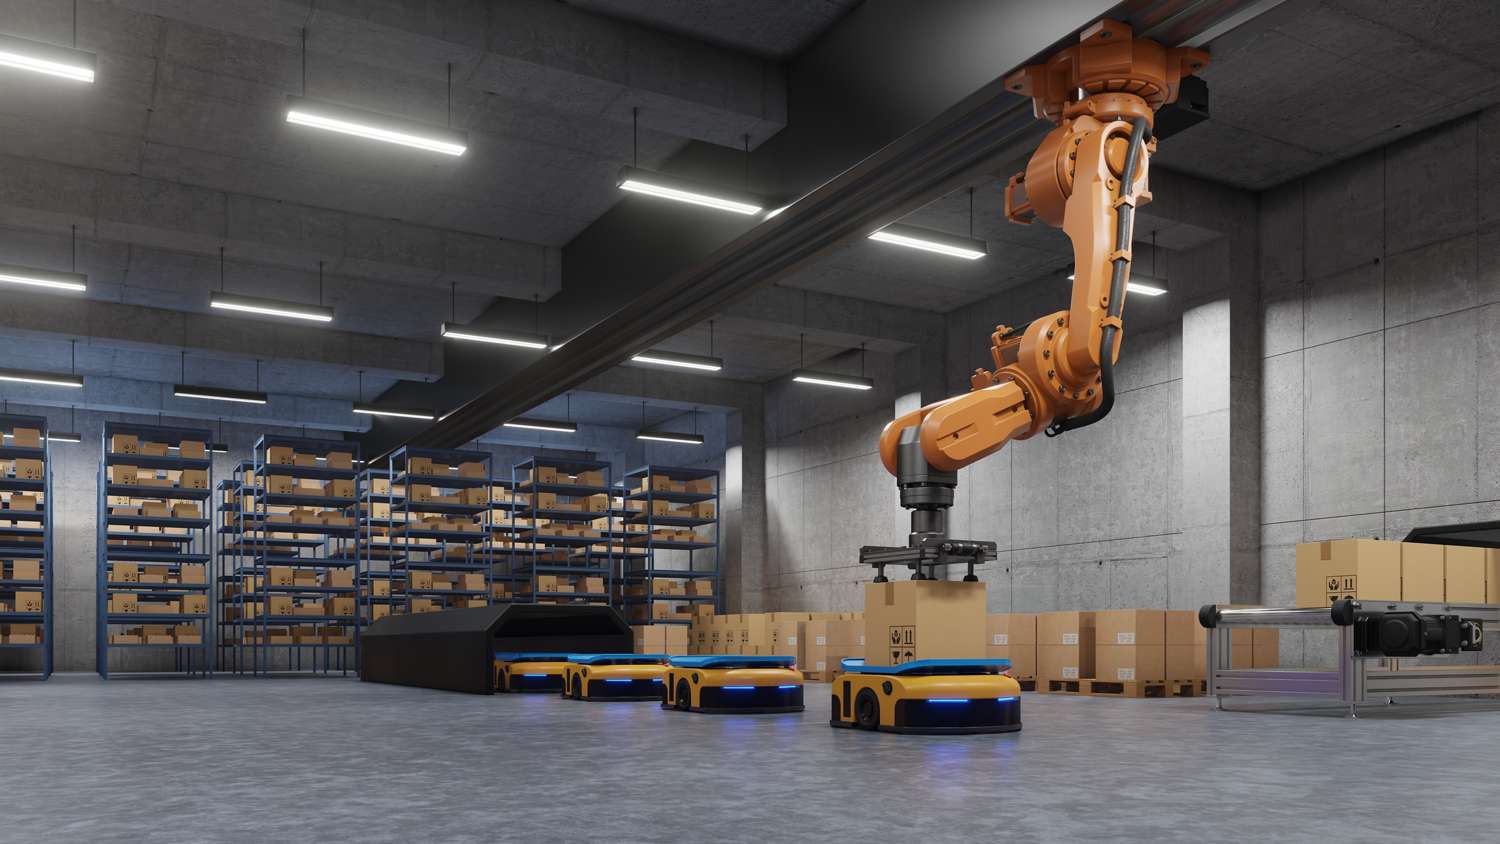 Robotic arm for packing using Automated Guided Vehicle (AGV)